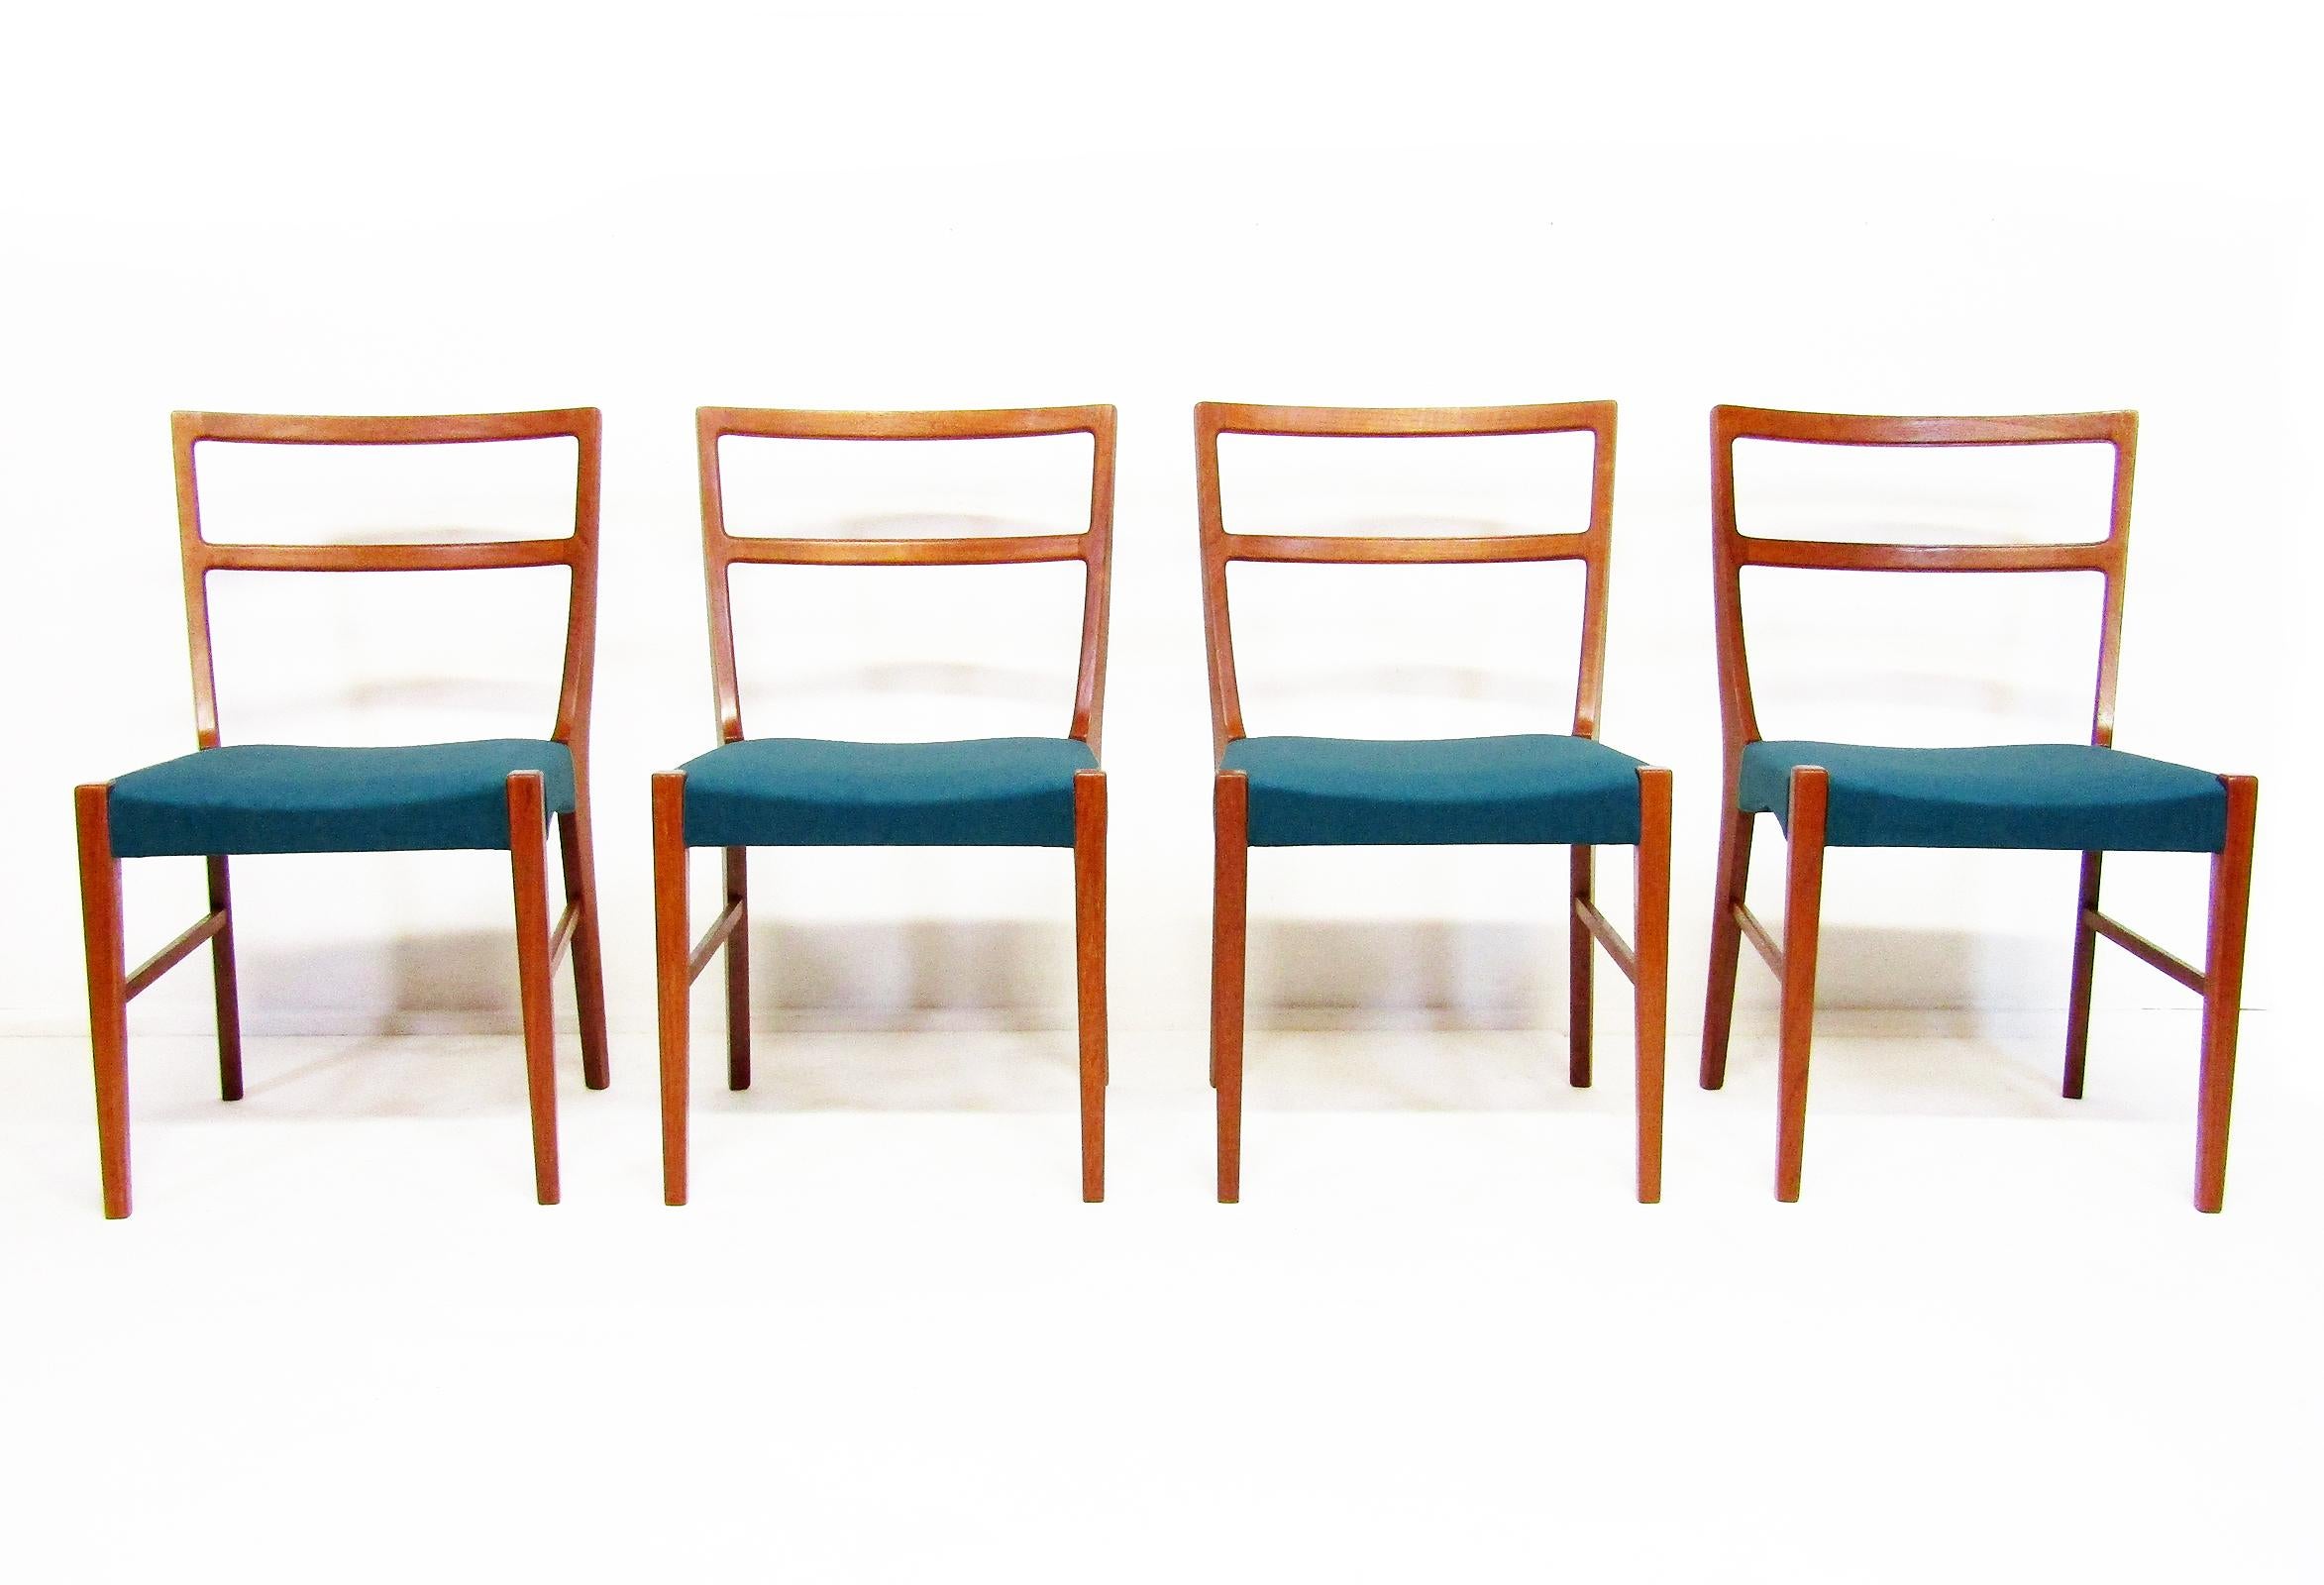 A set of four 1960s Danish dining chairs in teak by Johannes Andersen for Bernhard Pedersen & Sons.

The understated quality belies the sophistication of these chairs. The fine contours of the backrest and subtle taper of the legs create a design